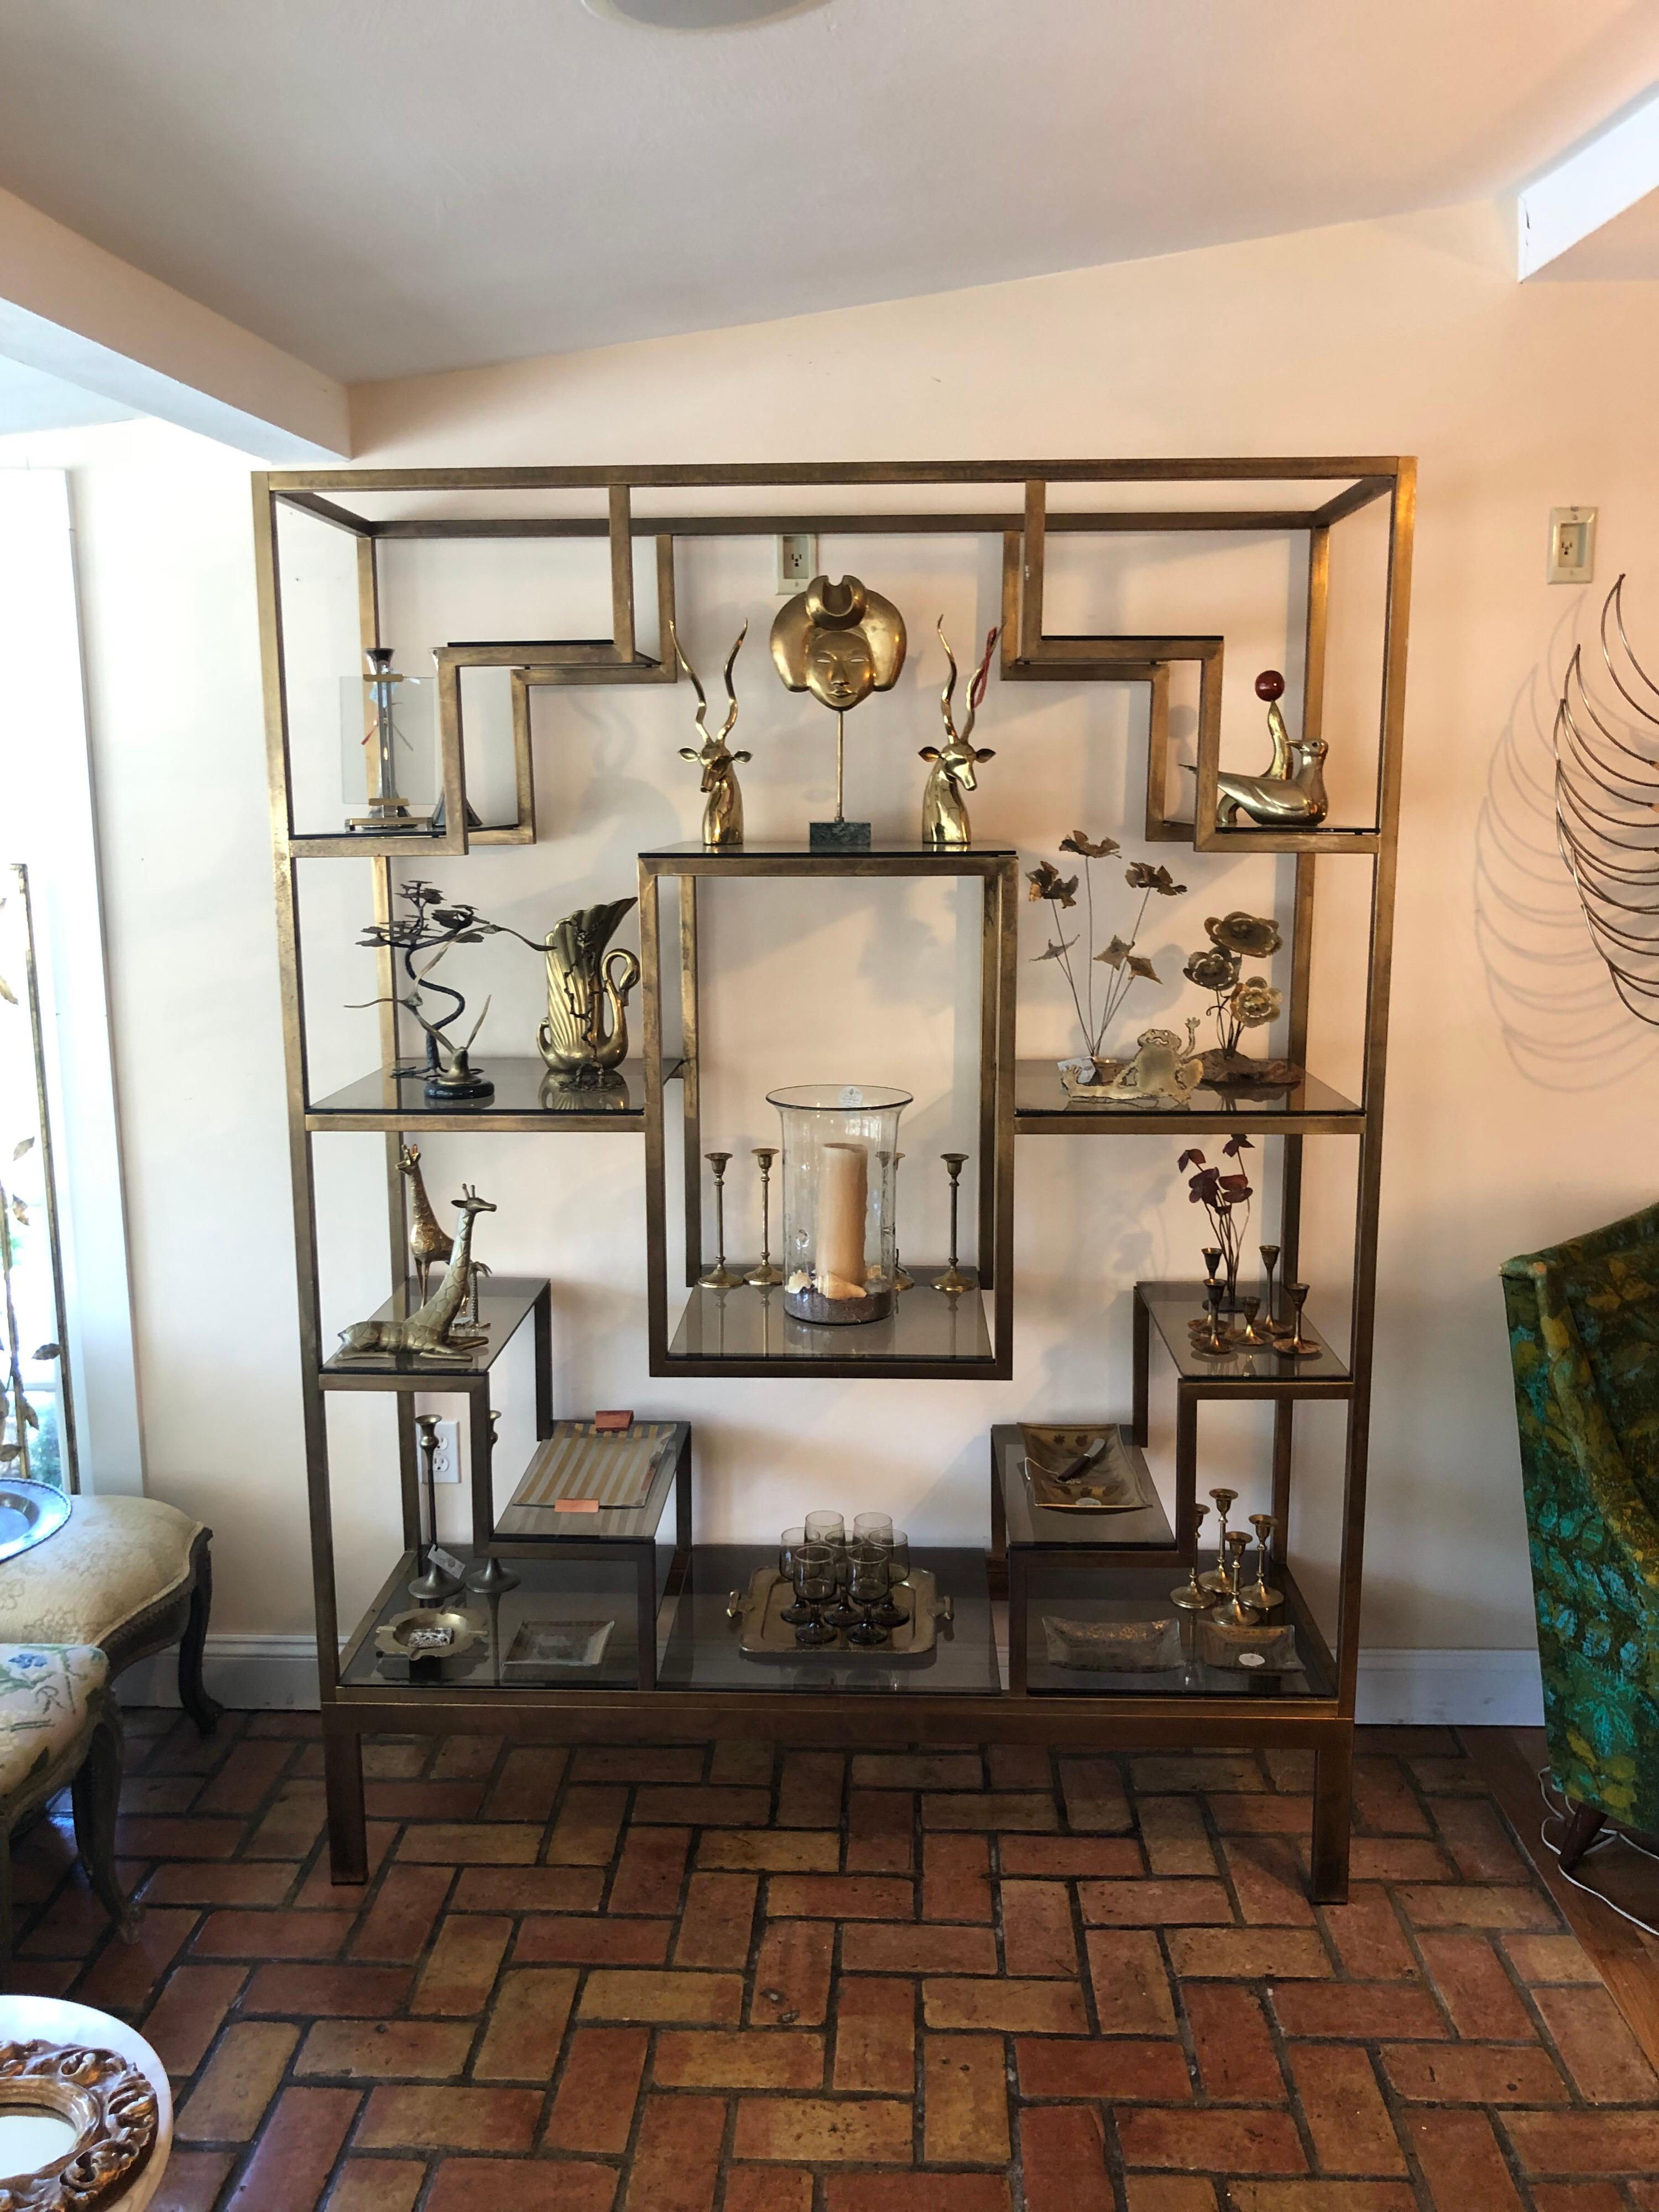 Large geometric brass étagère attributed to Romeo Rega. Made in Italy. Amazing quality and design. Antiqued brass finish with smoked glass shelves. High end designer piece that will light up any room. Great for display.